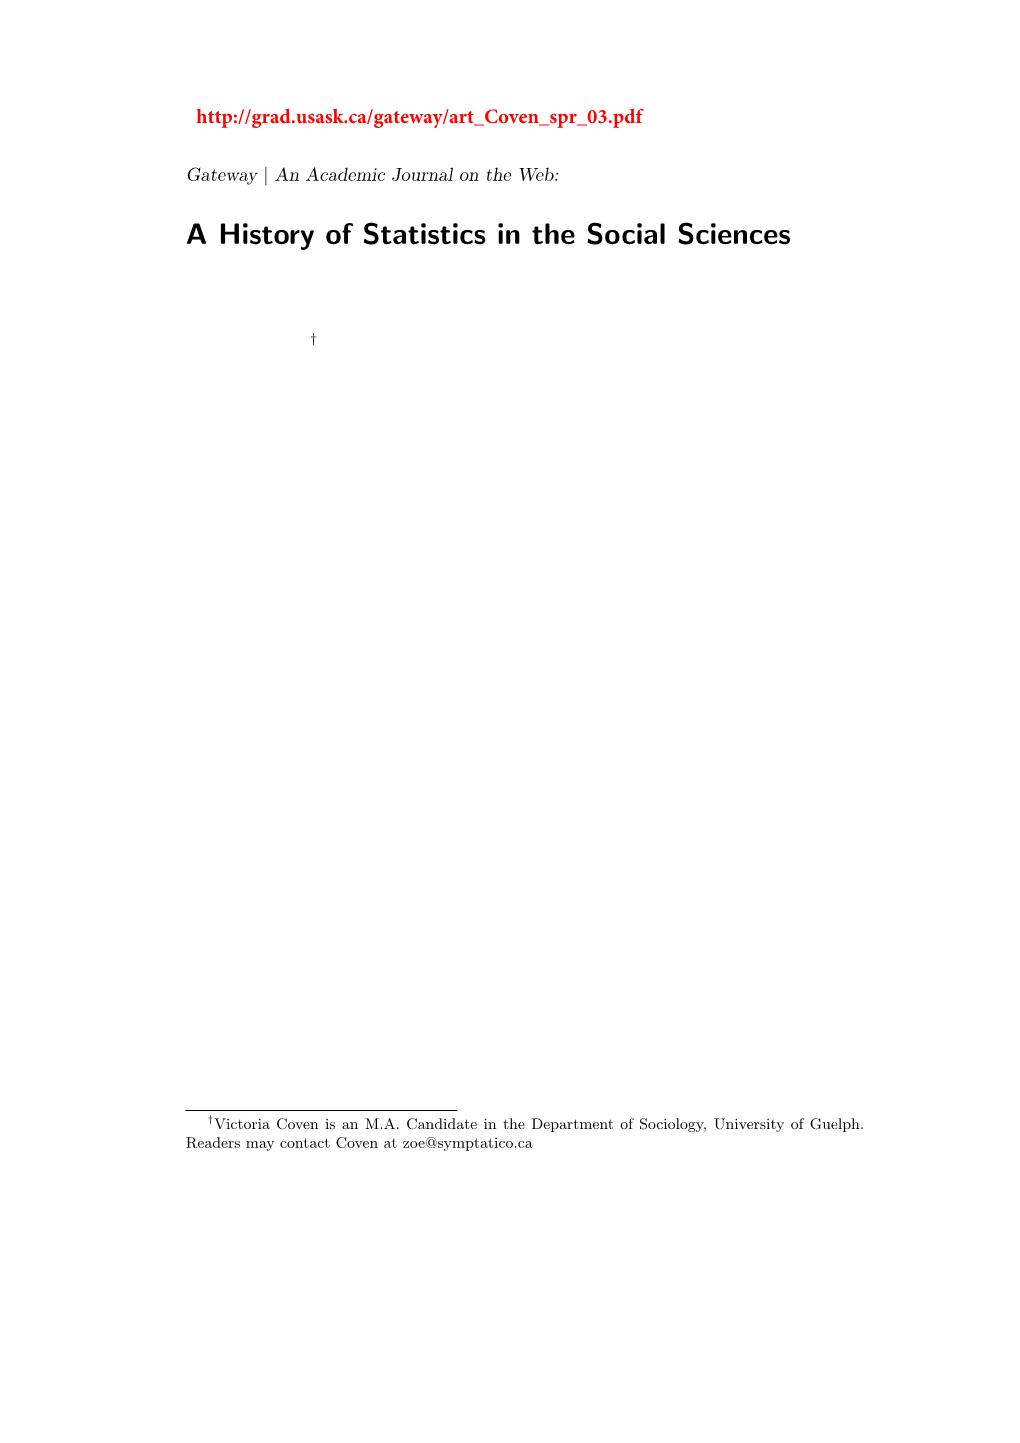 A History of Statistics in the Social Sciences